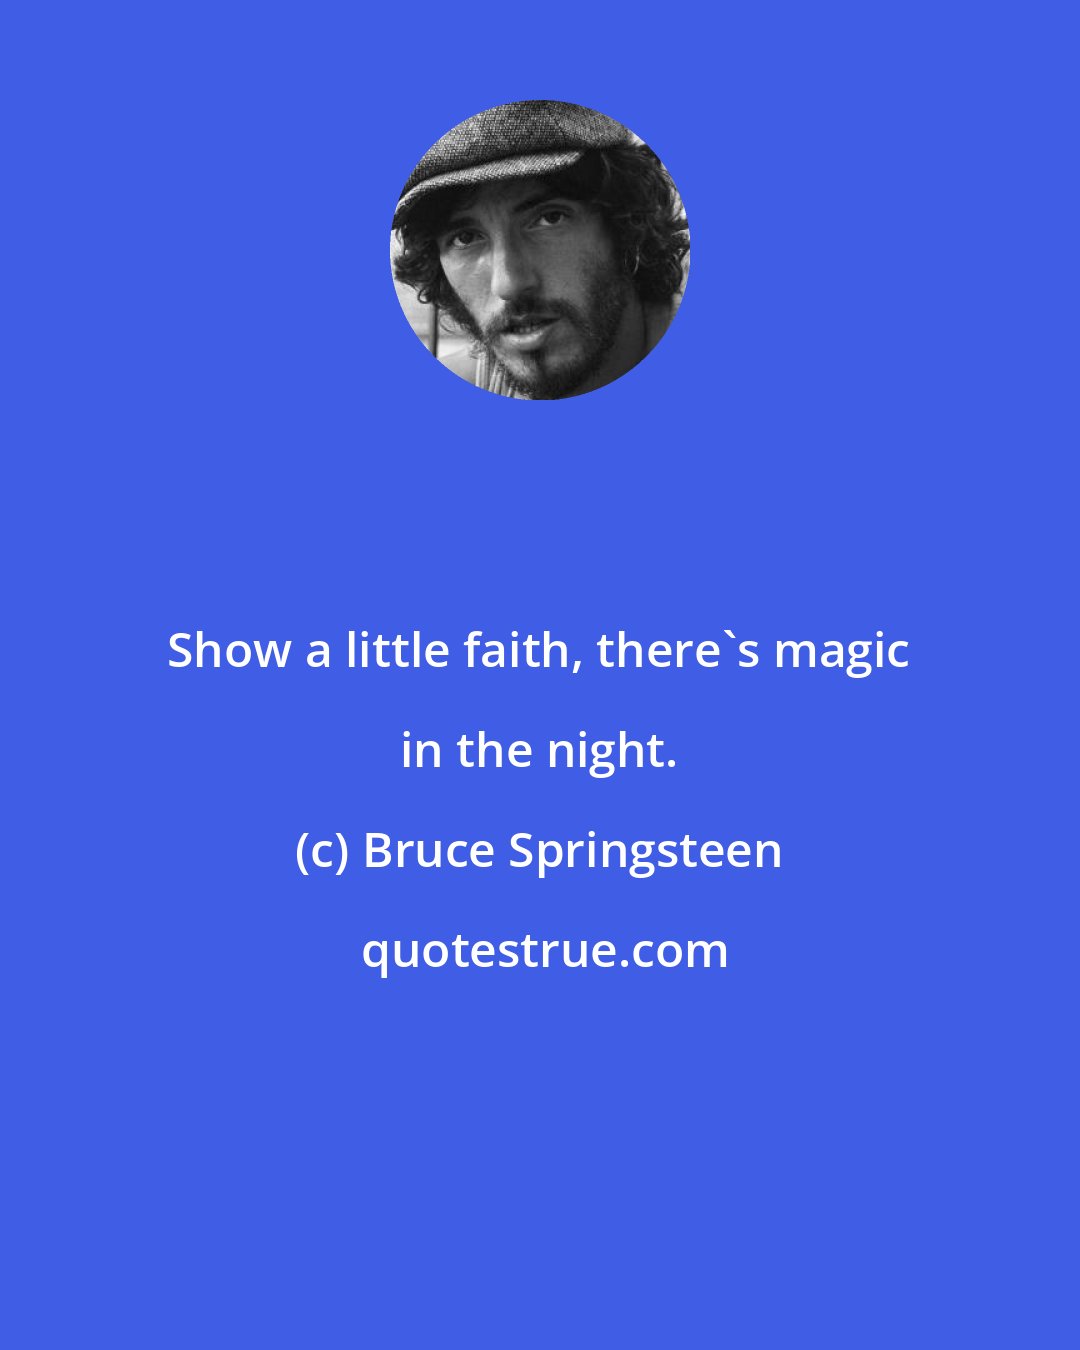 Bruce Springsteen: Show a little faith, there's magic in the night.